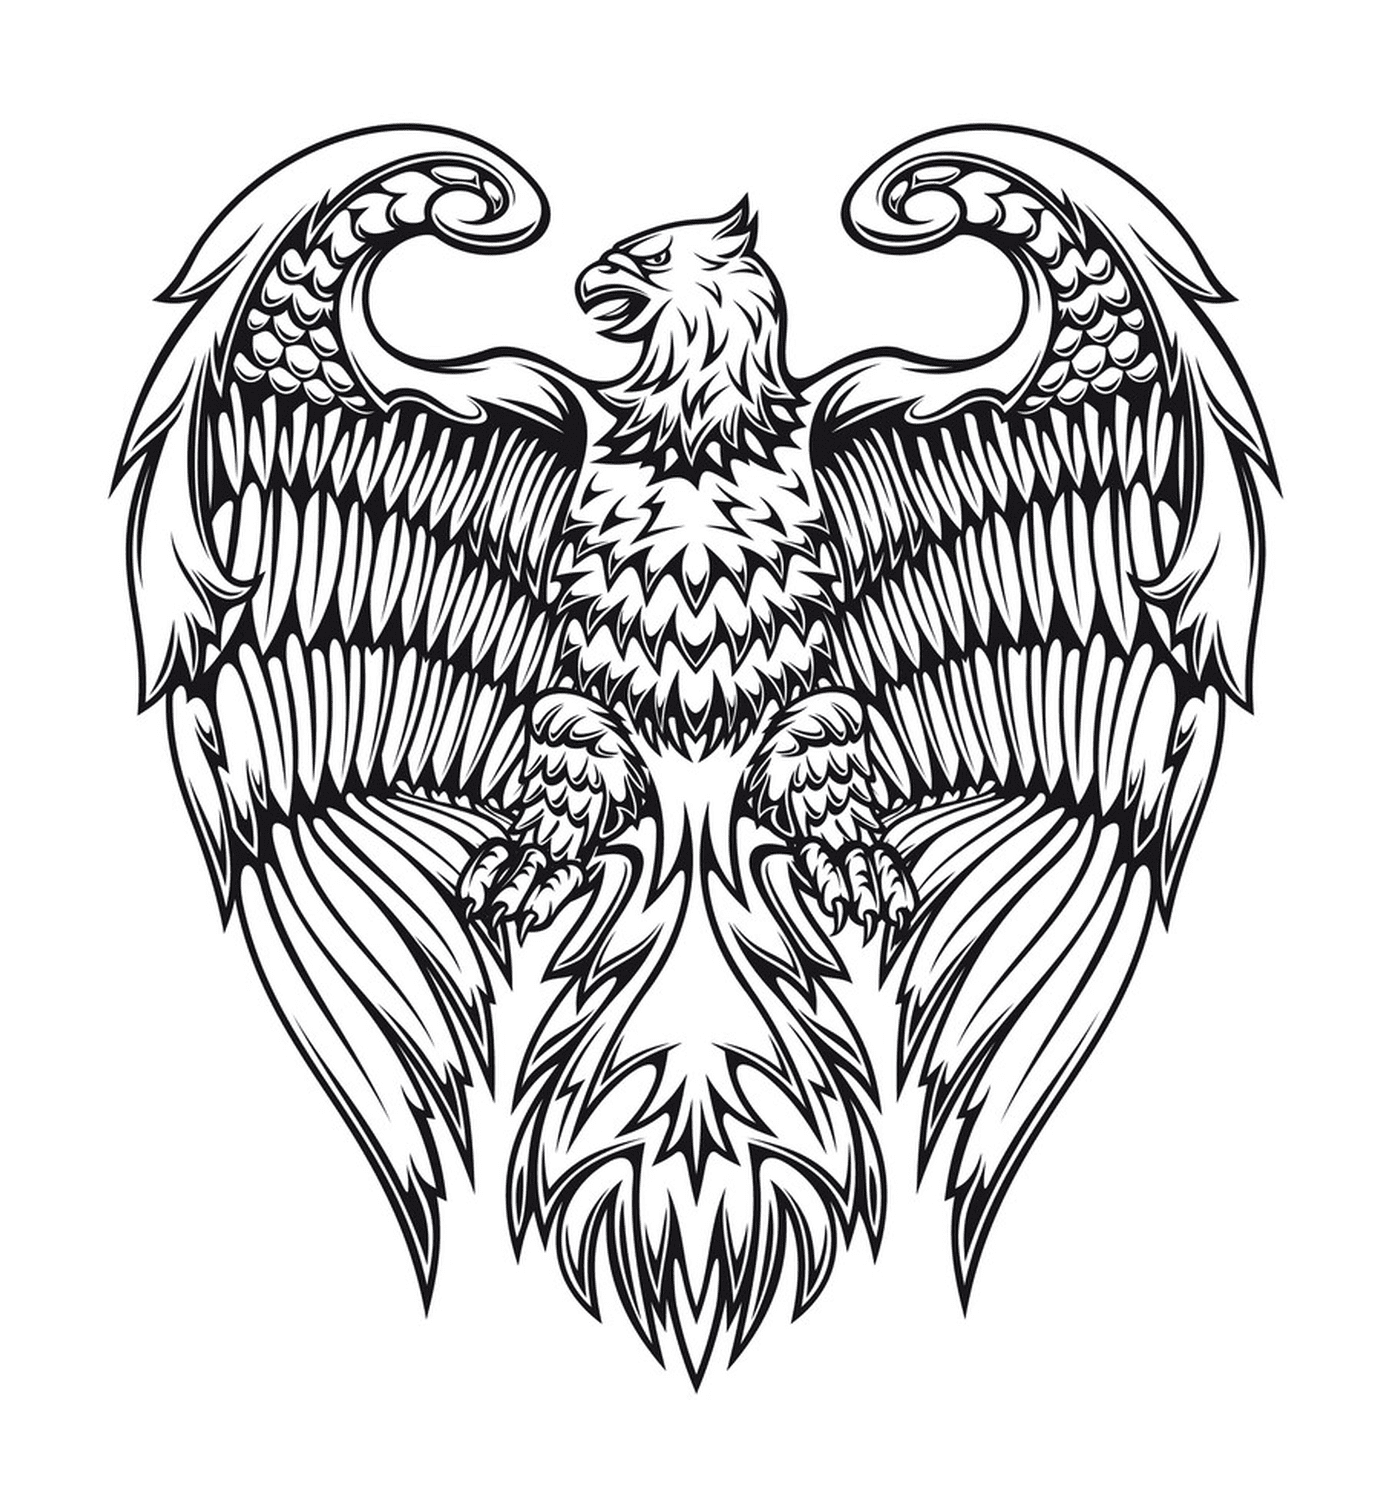  Royal eagle with various patterns 